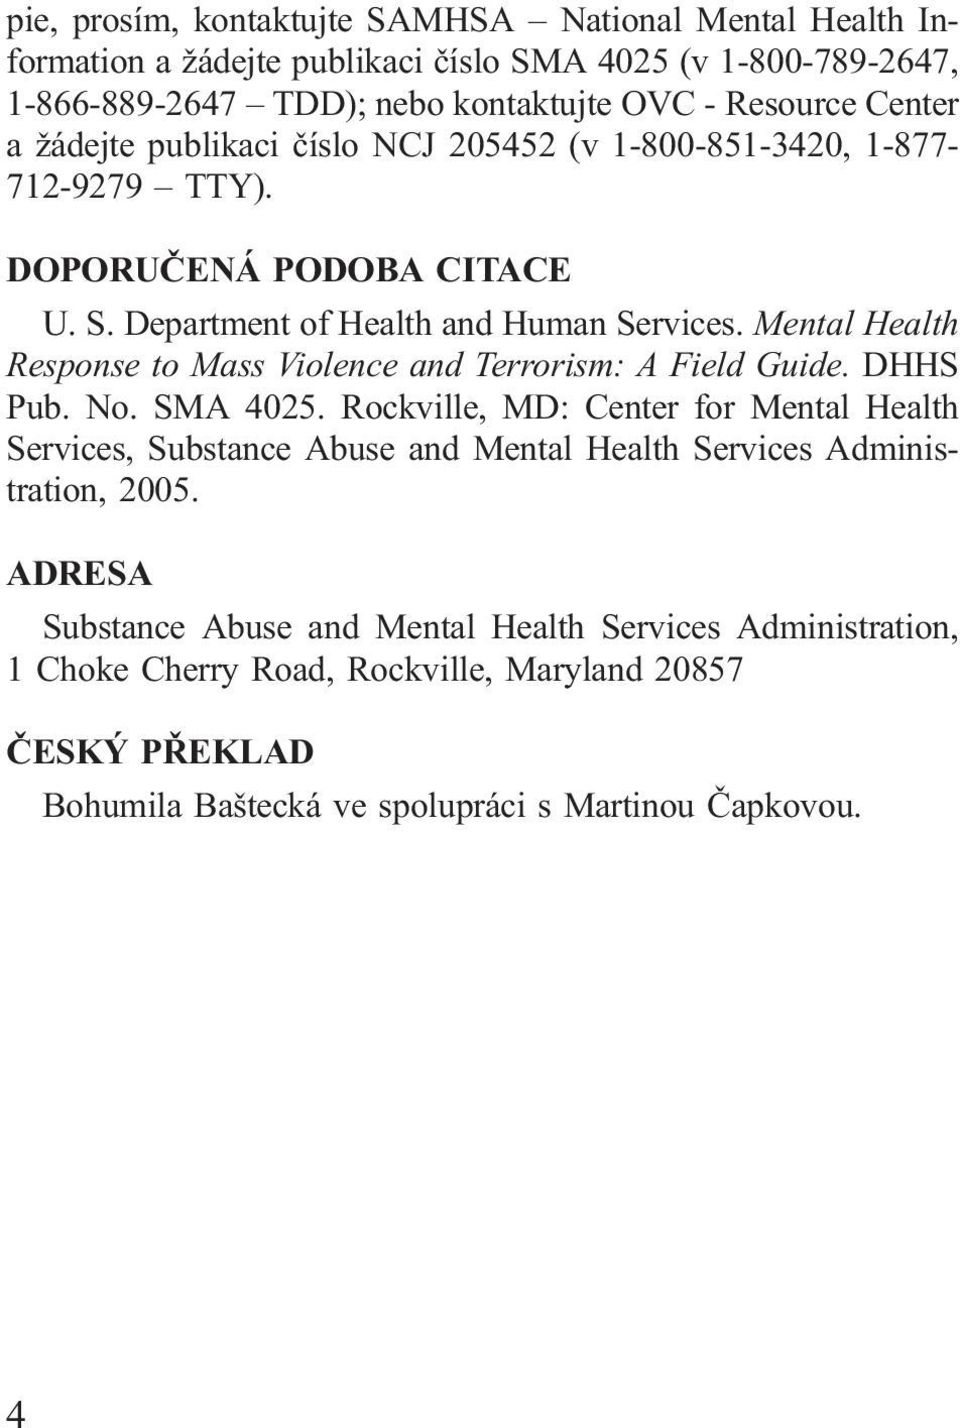 Mental Health Response to Mass Violence and Terrorism: A Field Guide. DHHS Pub. No. SMA 4025.